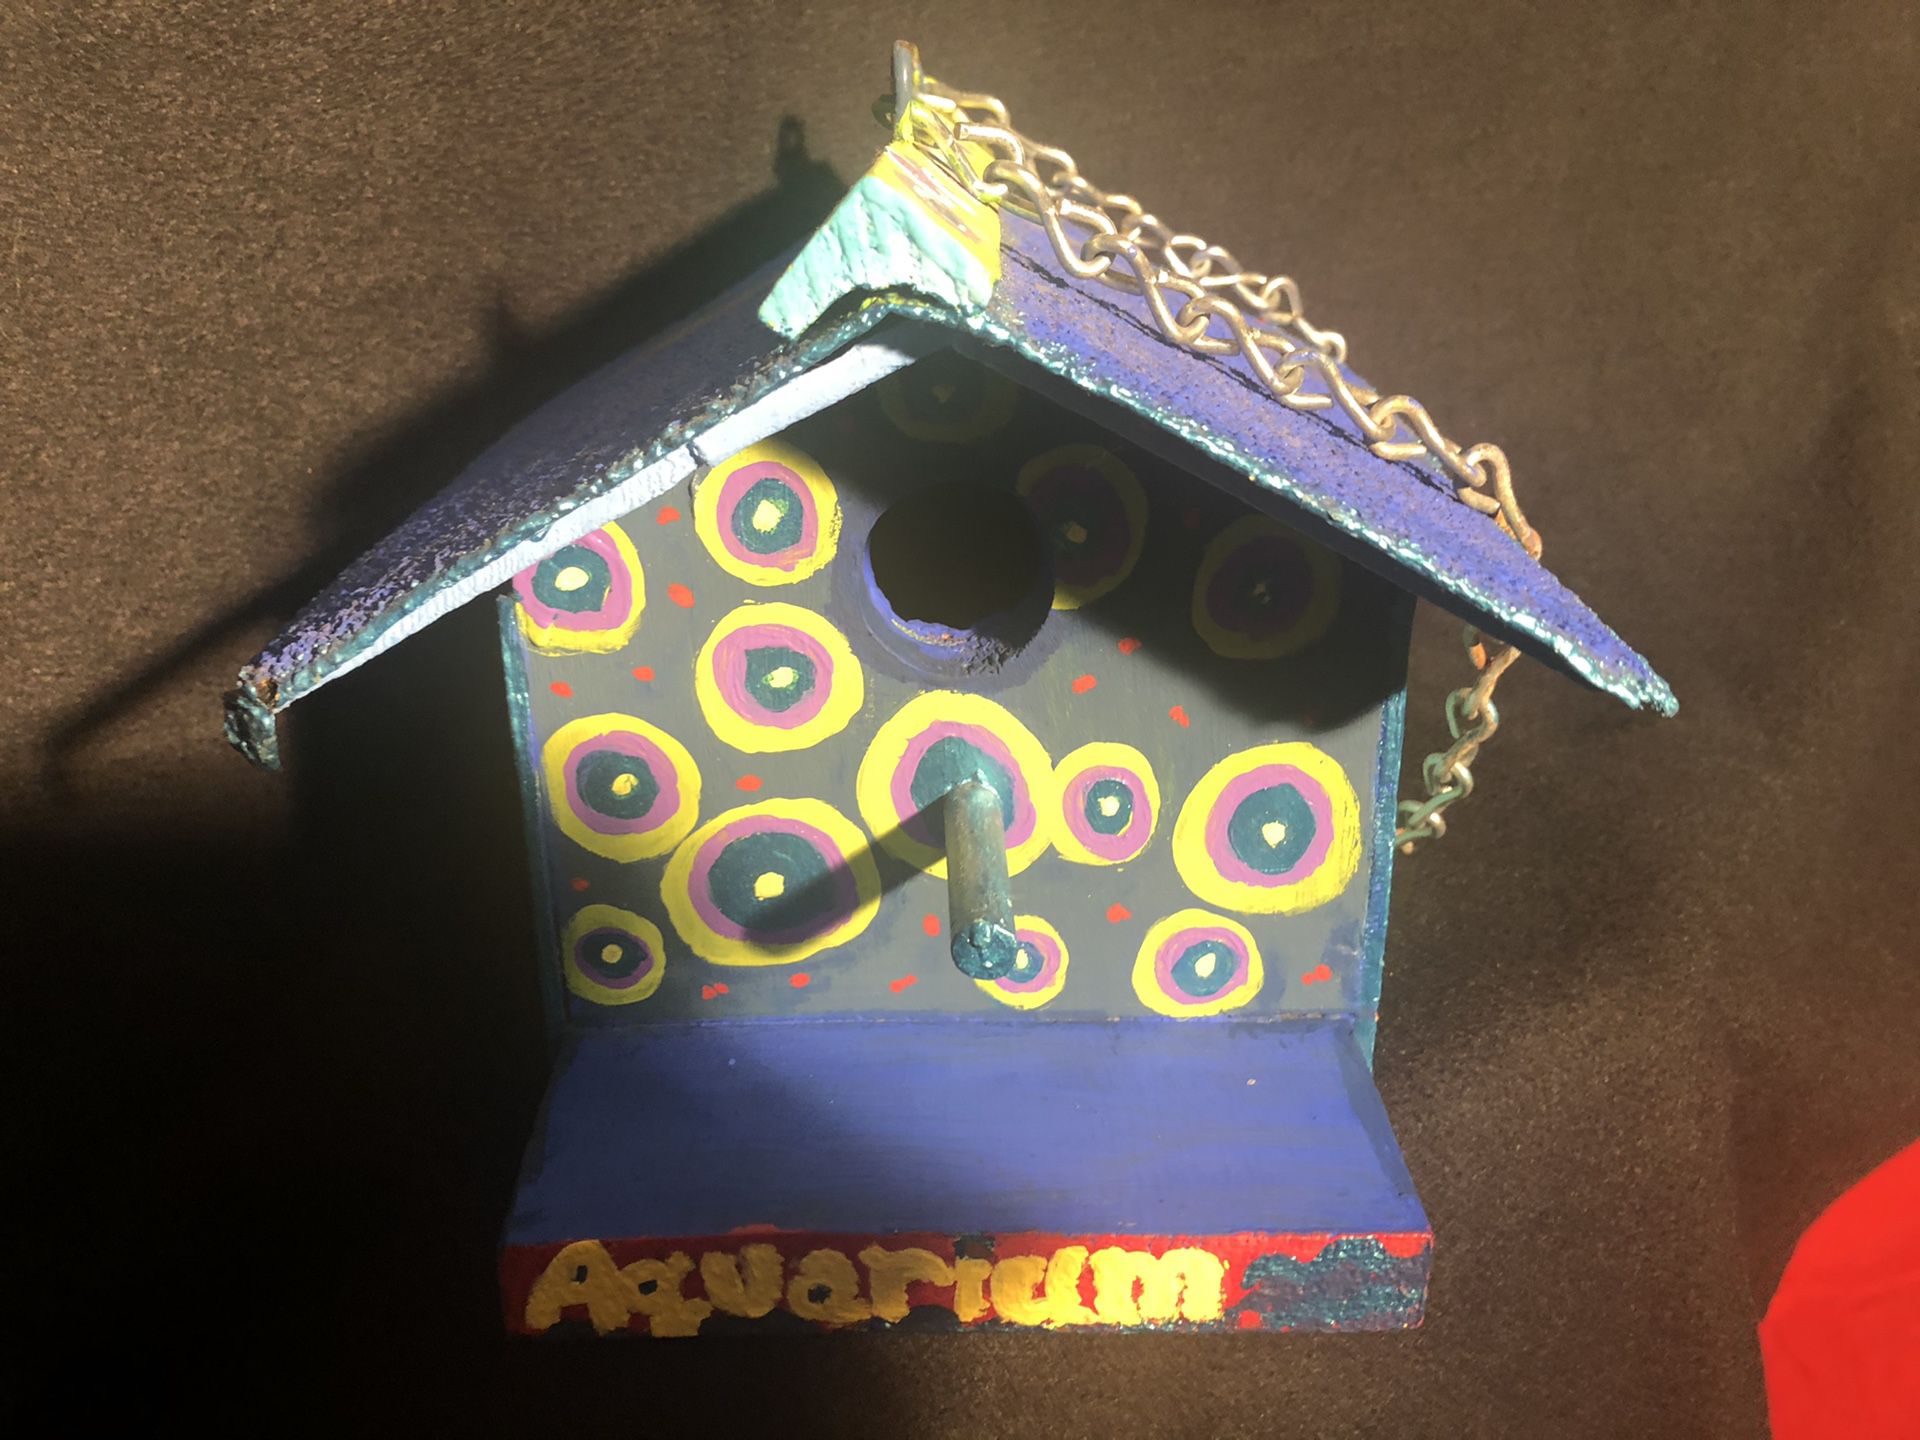 The Aquarium bird house. Bright colors, hand painted, hangs by a chain